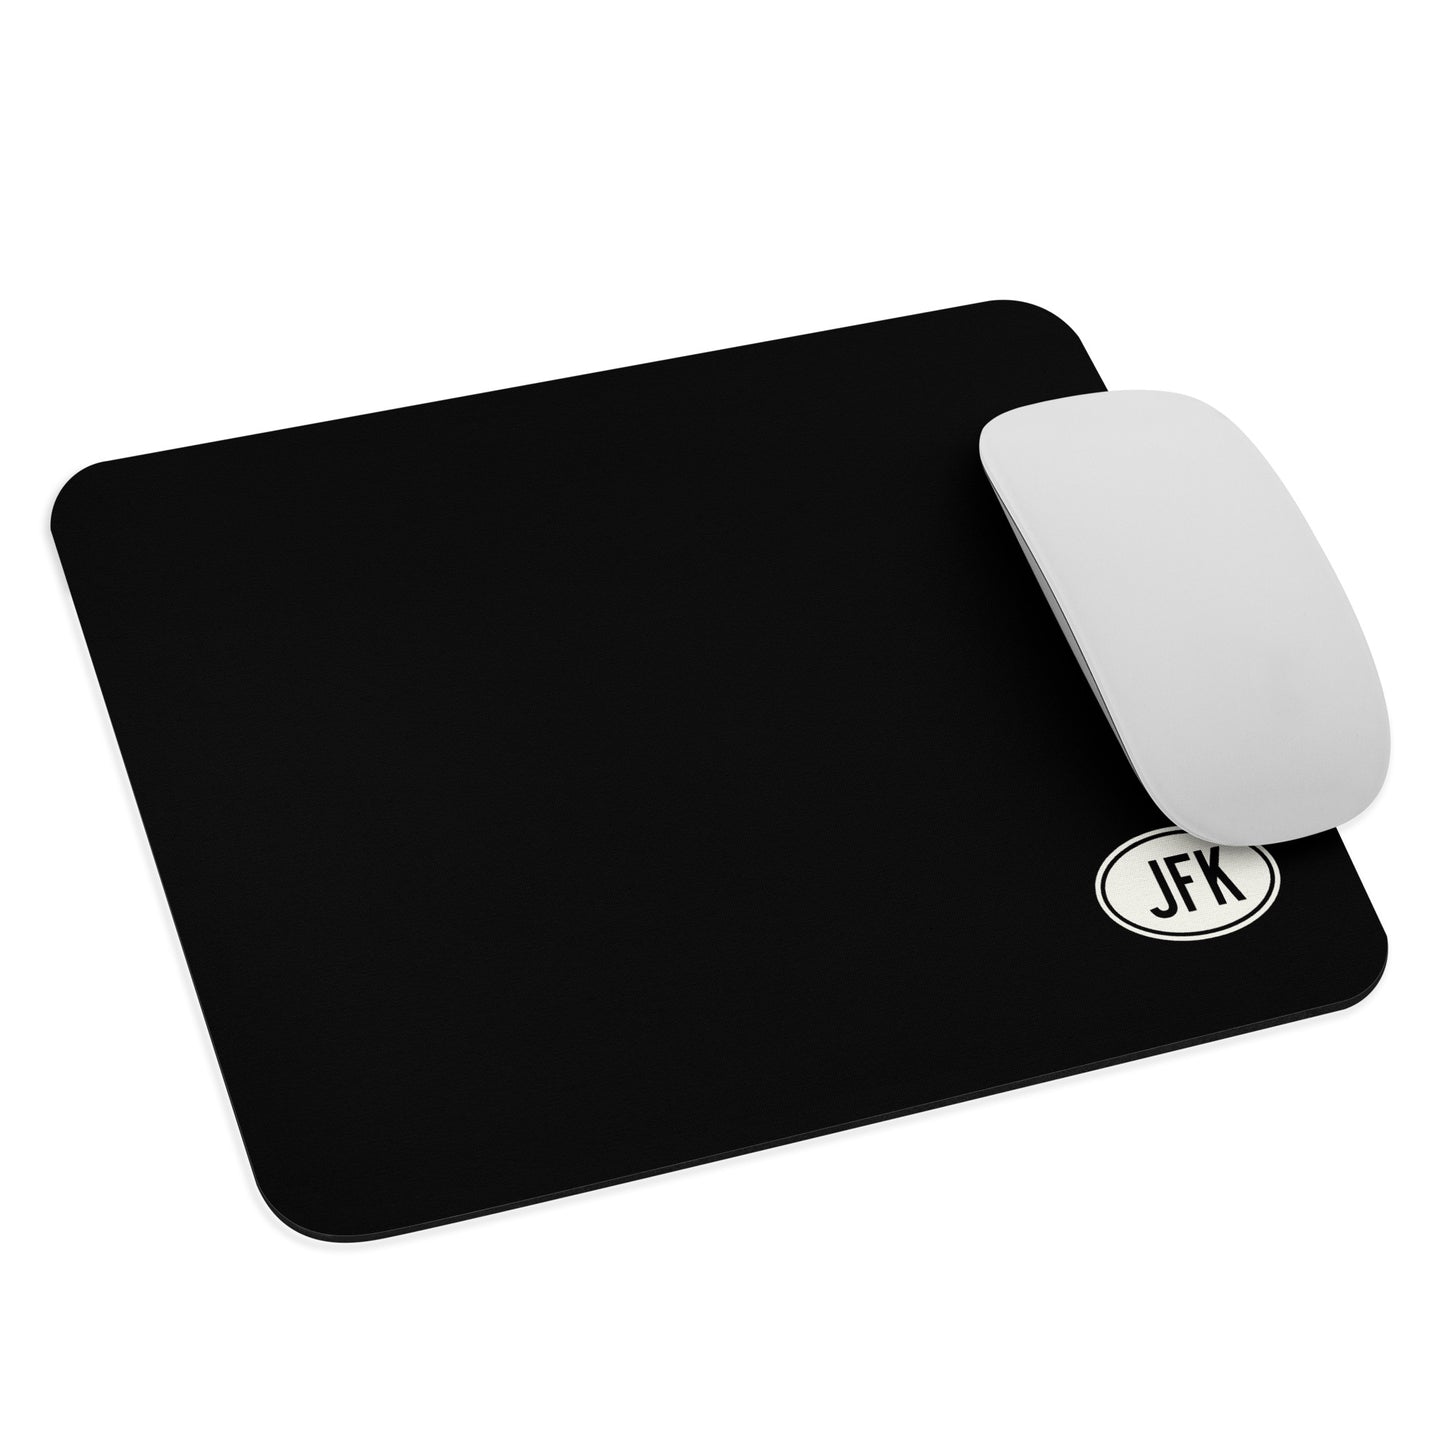 Unique Travel Gift Mouse Pad - White Oval • JFK New York City • YHM Designs - Image 03